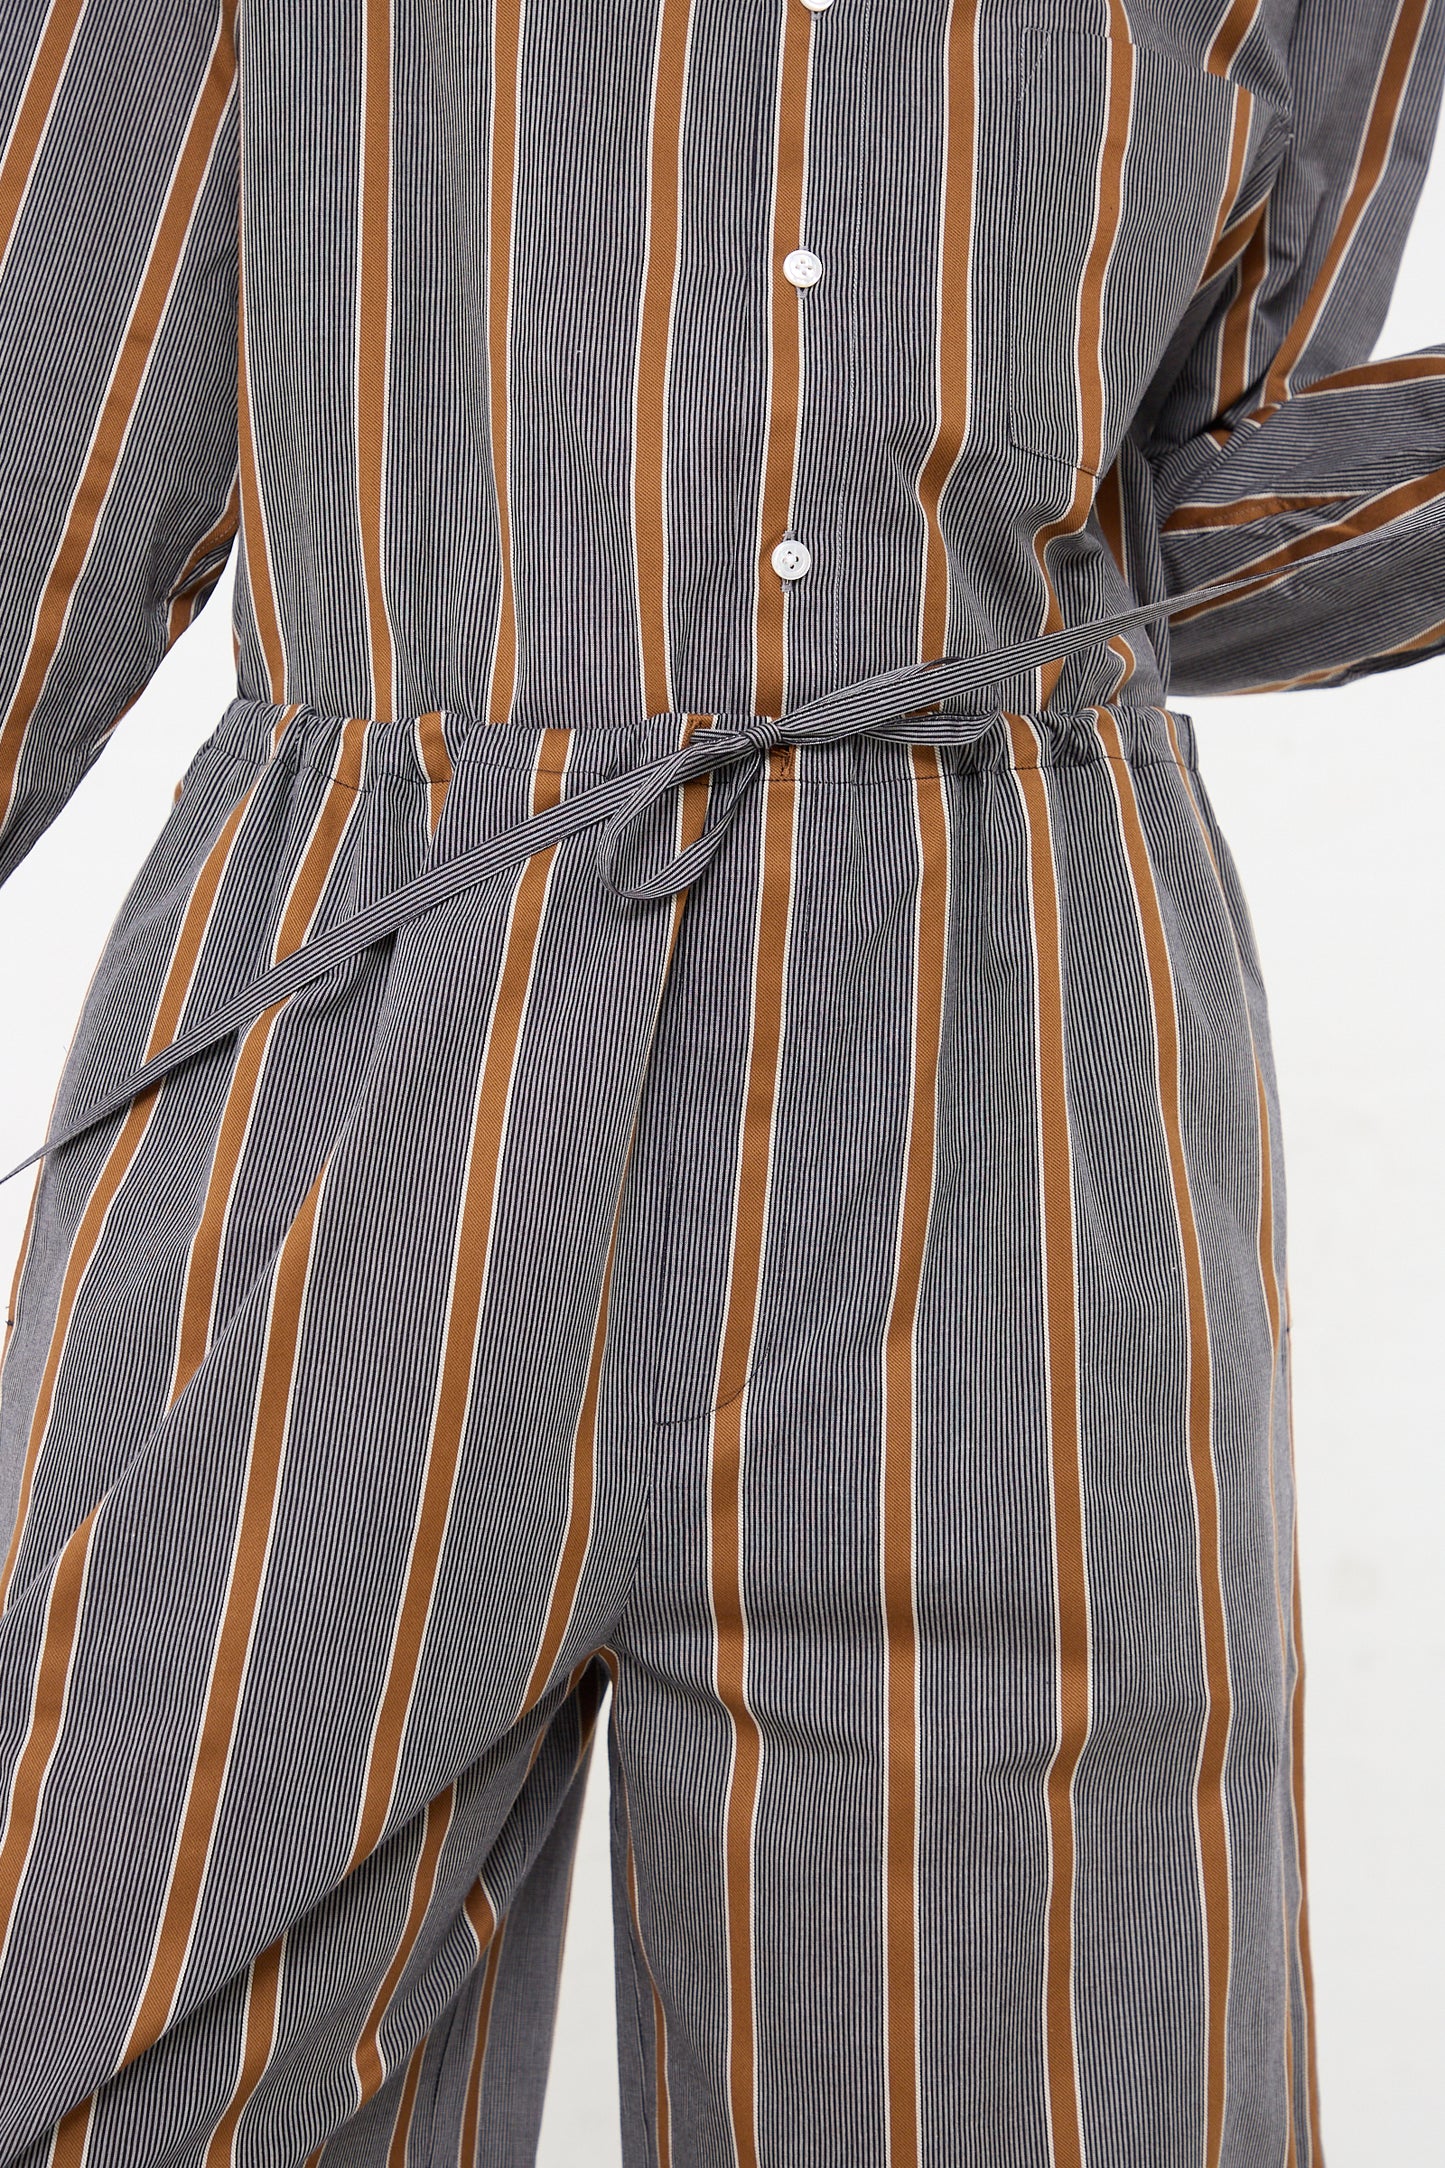 A woman wearing the Cristaseya Maxi Large Pant in Striped Black and Noisette, a lightweight Japanese cotton jumpsuit with wide leg and an oversized drawstring pant in grey and orange stripes.